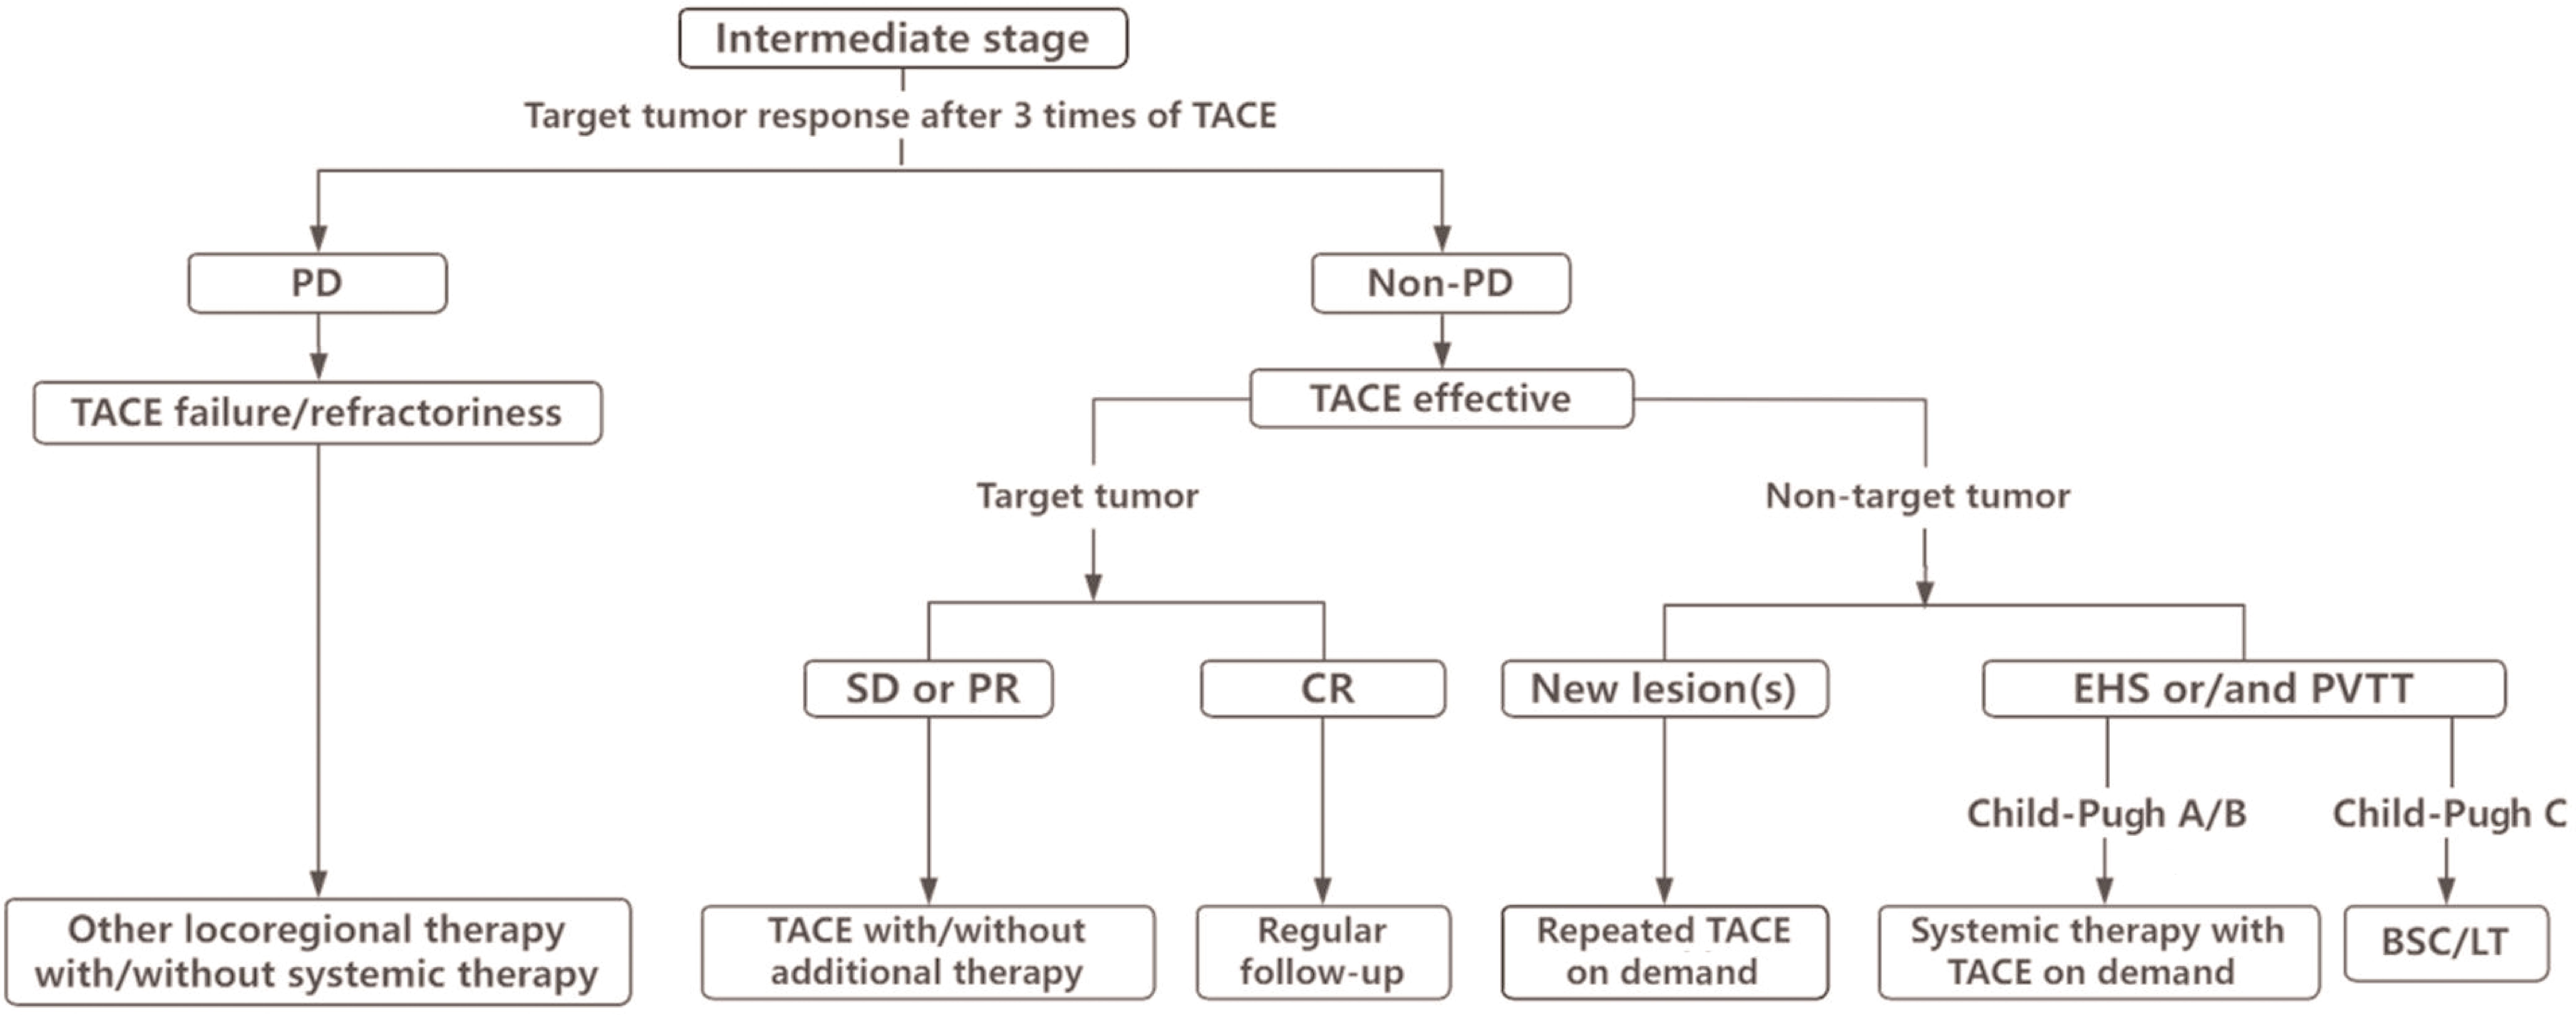 Algorithm decision tree for judging TACE failure/refractoriness and recommending subsequent treatment.